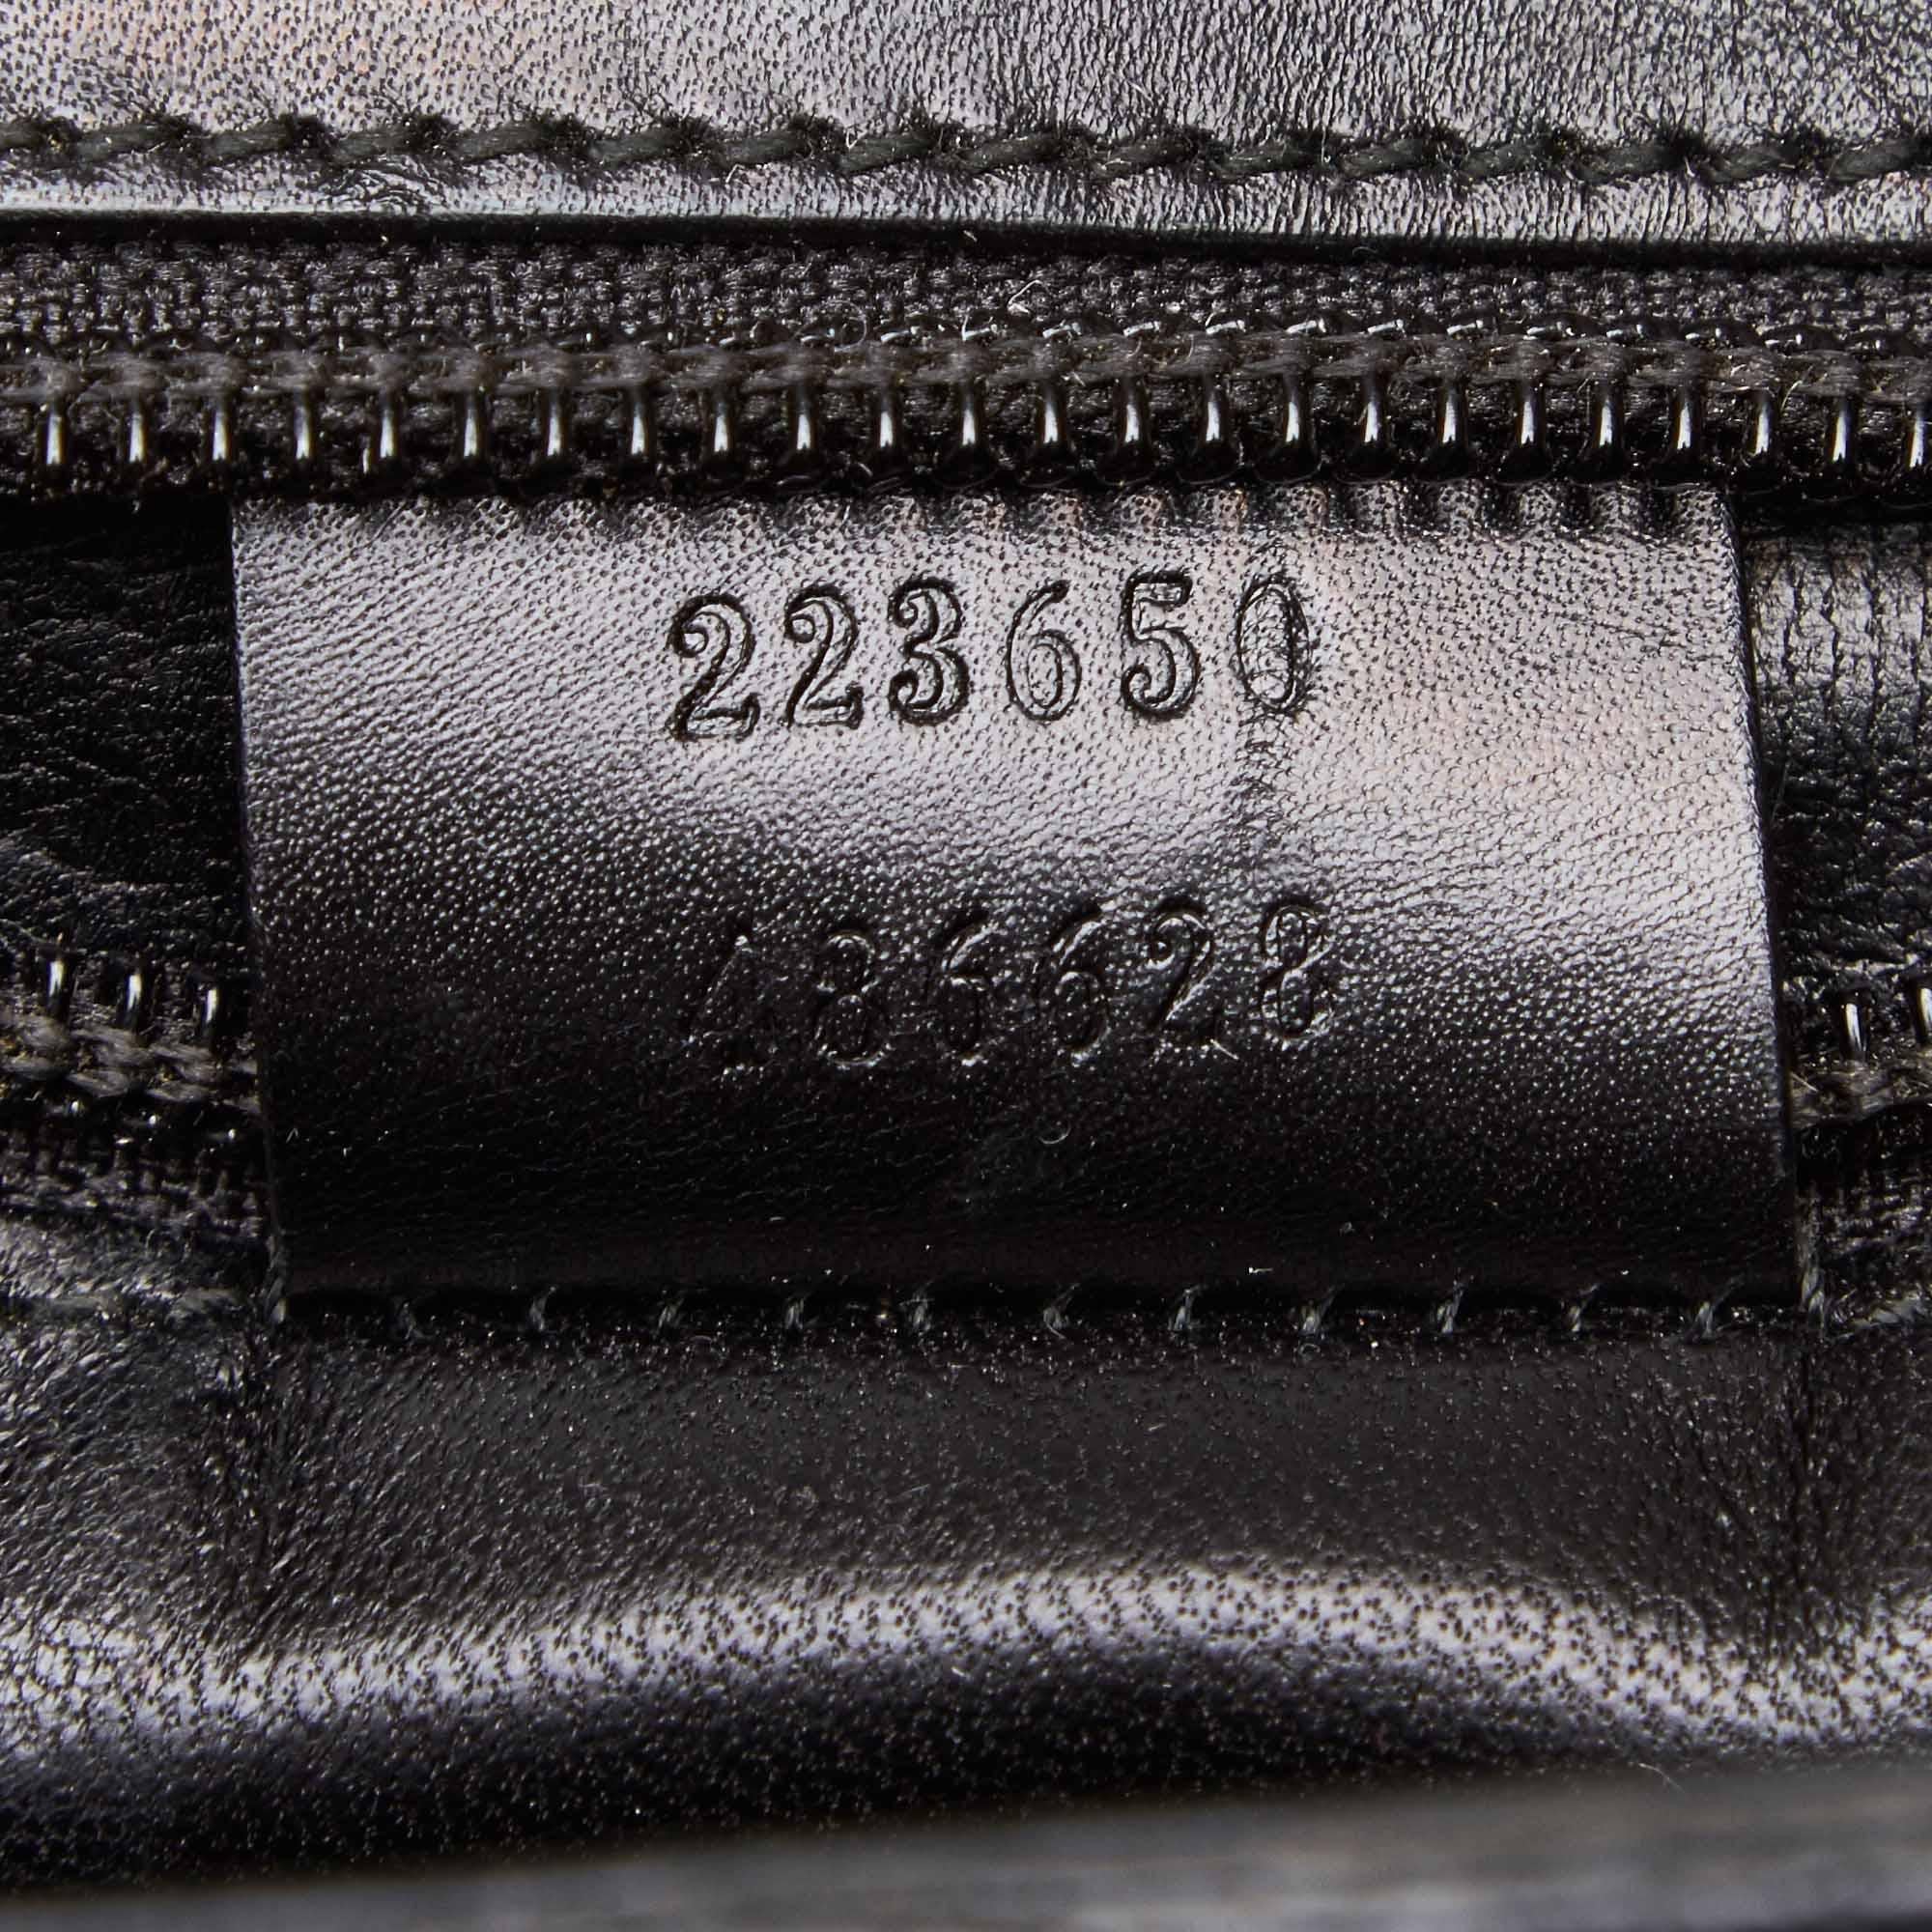 Vintage Authentic Gucci Black Leather Business Bag Italy MEDIUM  For Sale 3